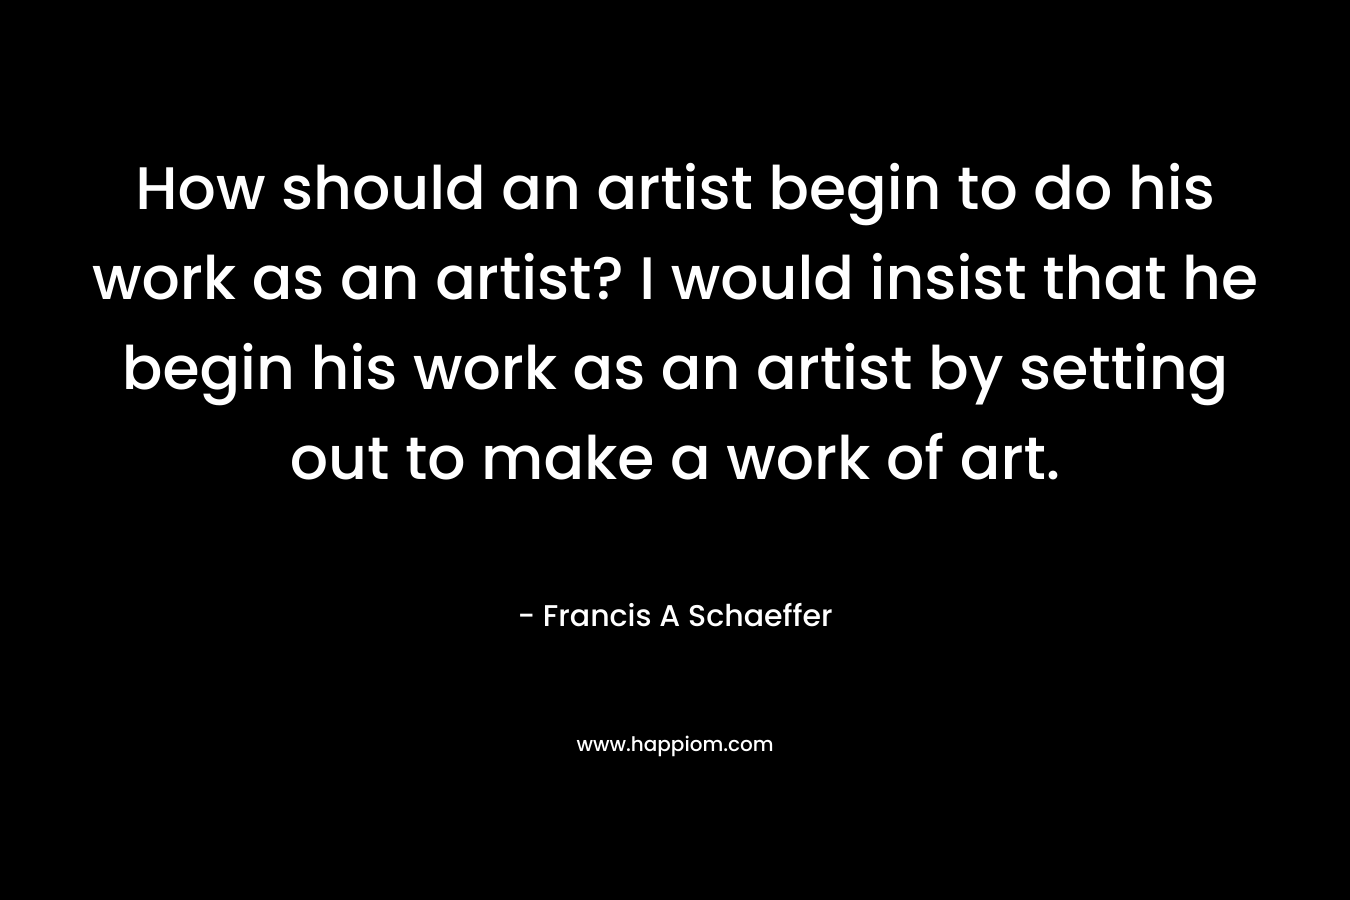 How should an artist begin to do his work as an artist? I would insist that he begin his work as an artist by setting out to make a work of art.